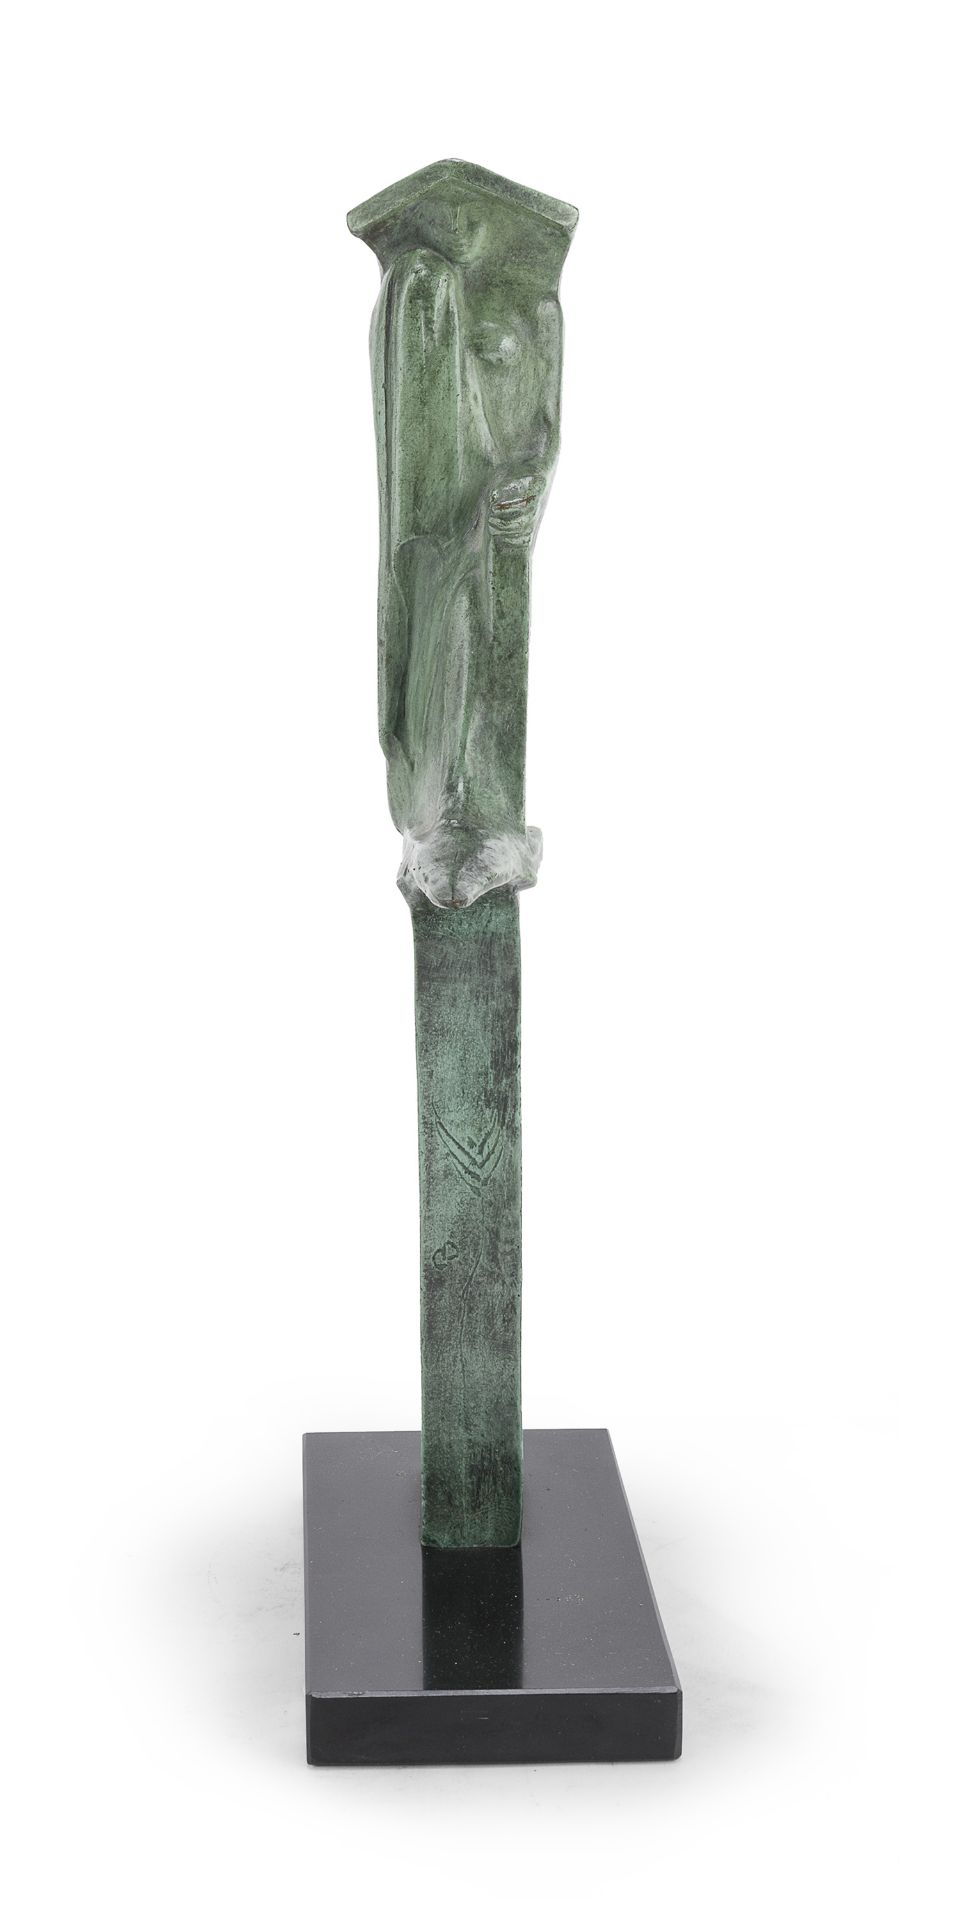 BRONZE SCULPTURE OF CYBELE BY DUILIO CAMBELLOTTI 1910/1992